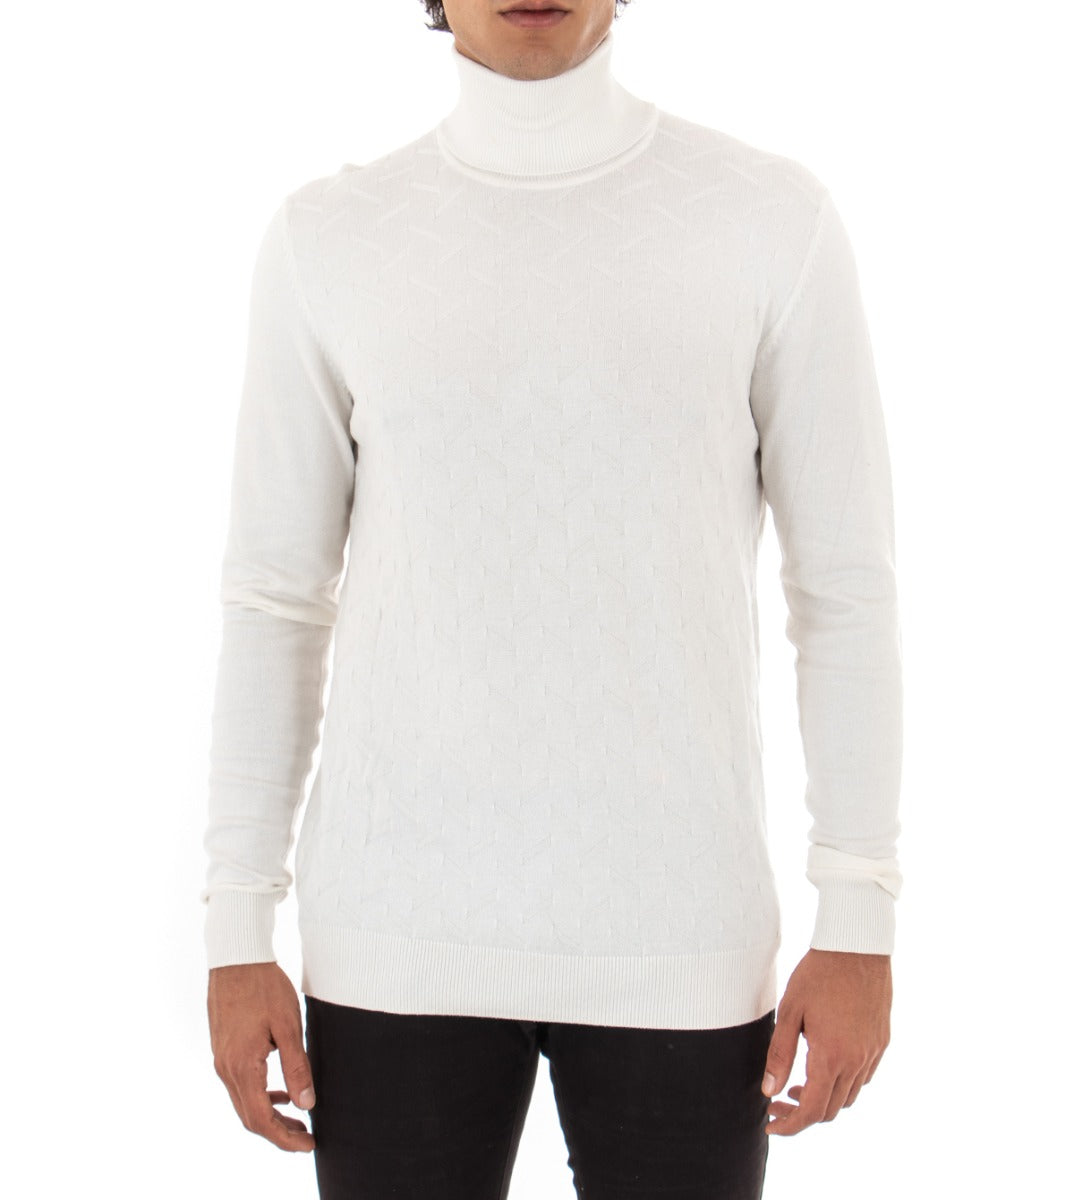 Men's Sweater Solid Color White High Neck Basic Casual Long Sleeves GIOSAL